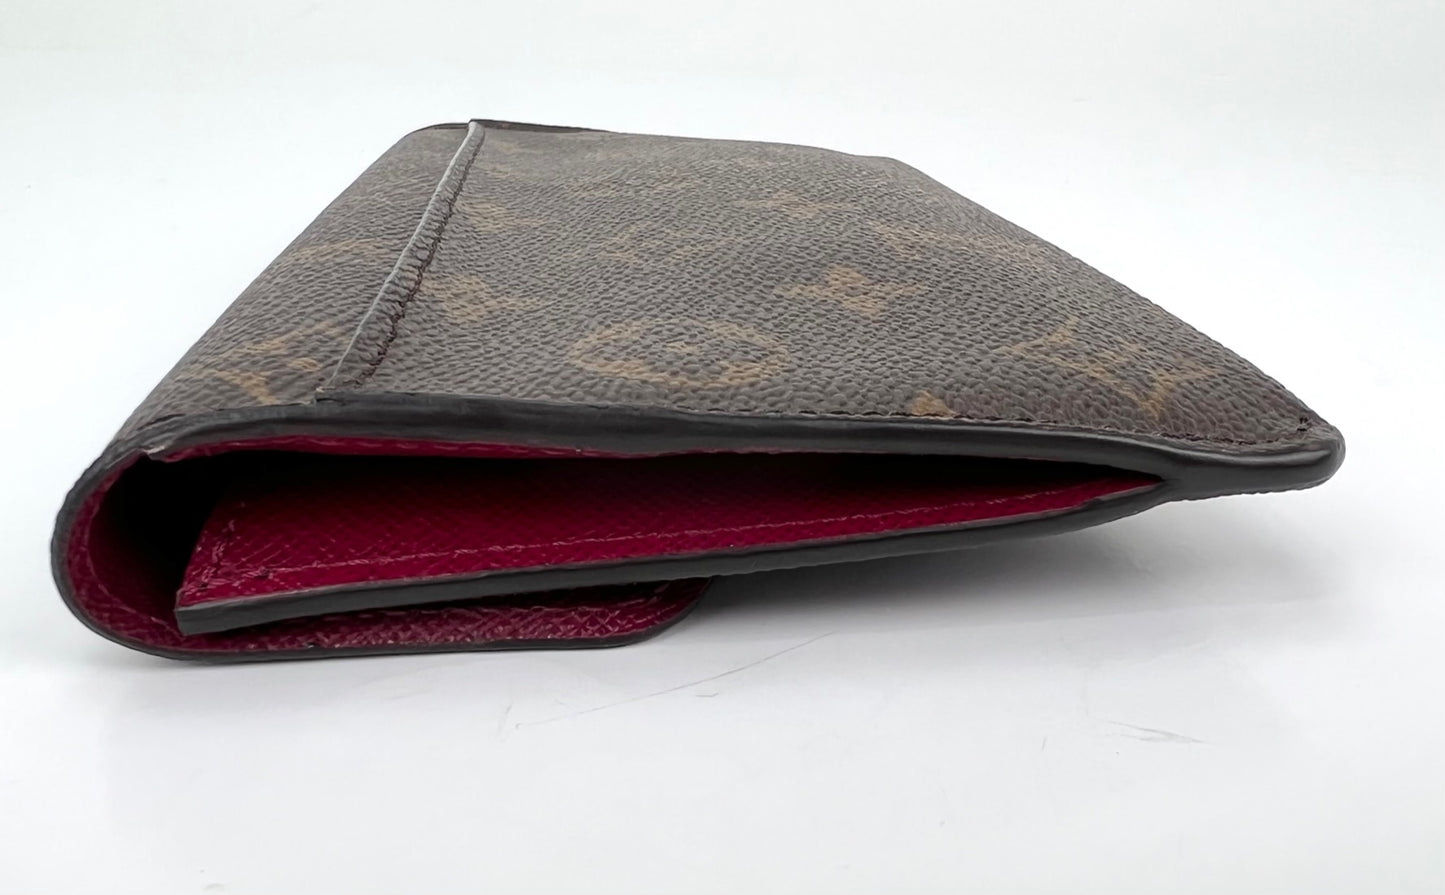 Louis Vuitton Cherrywood Pink Monogram Wallet – Lady Luxe Collection